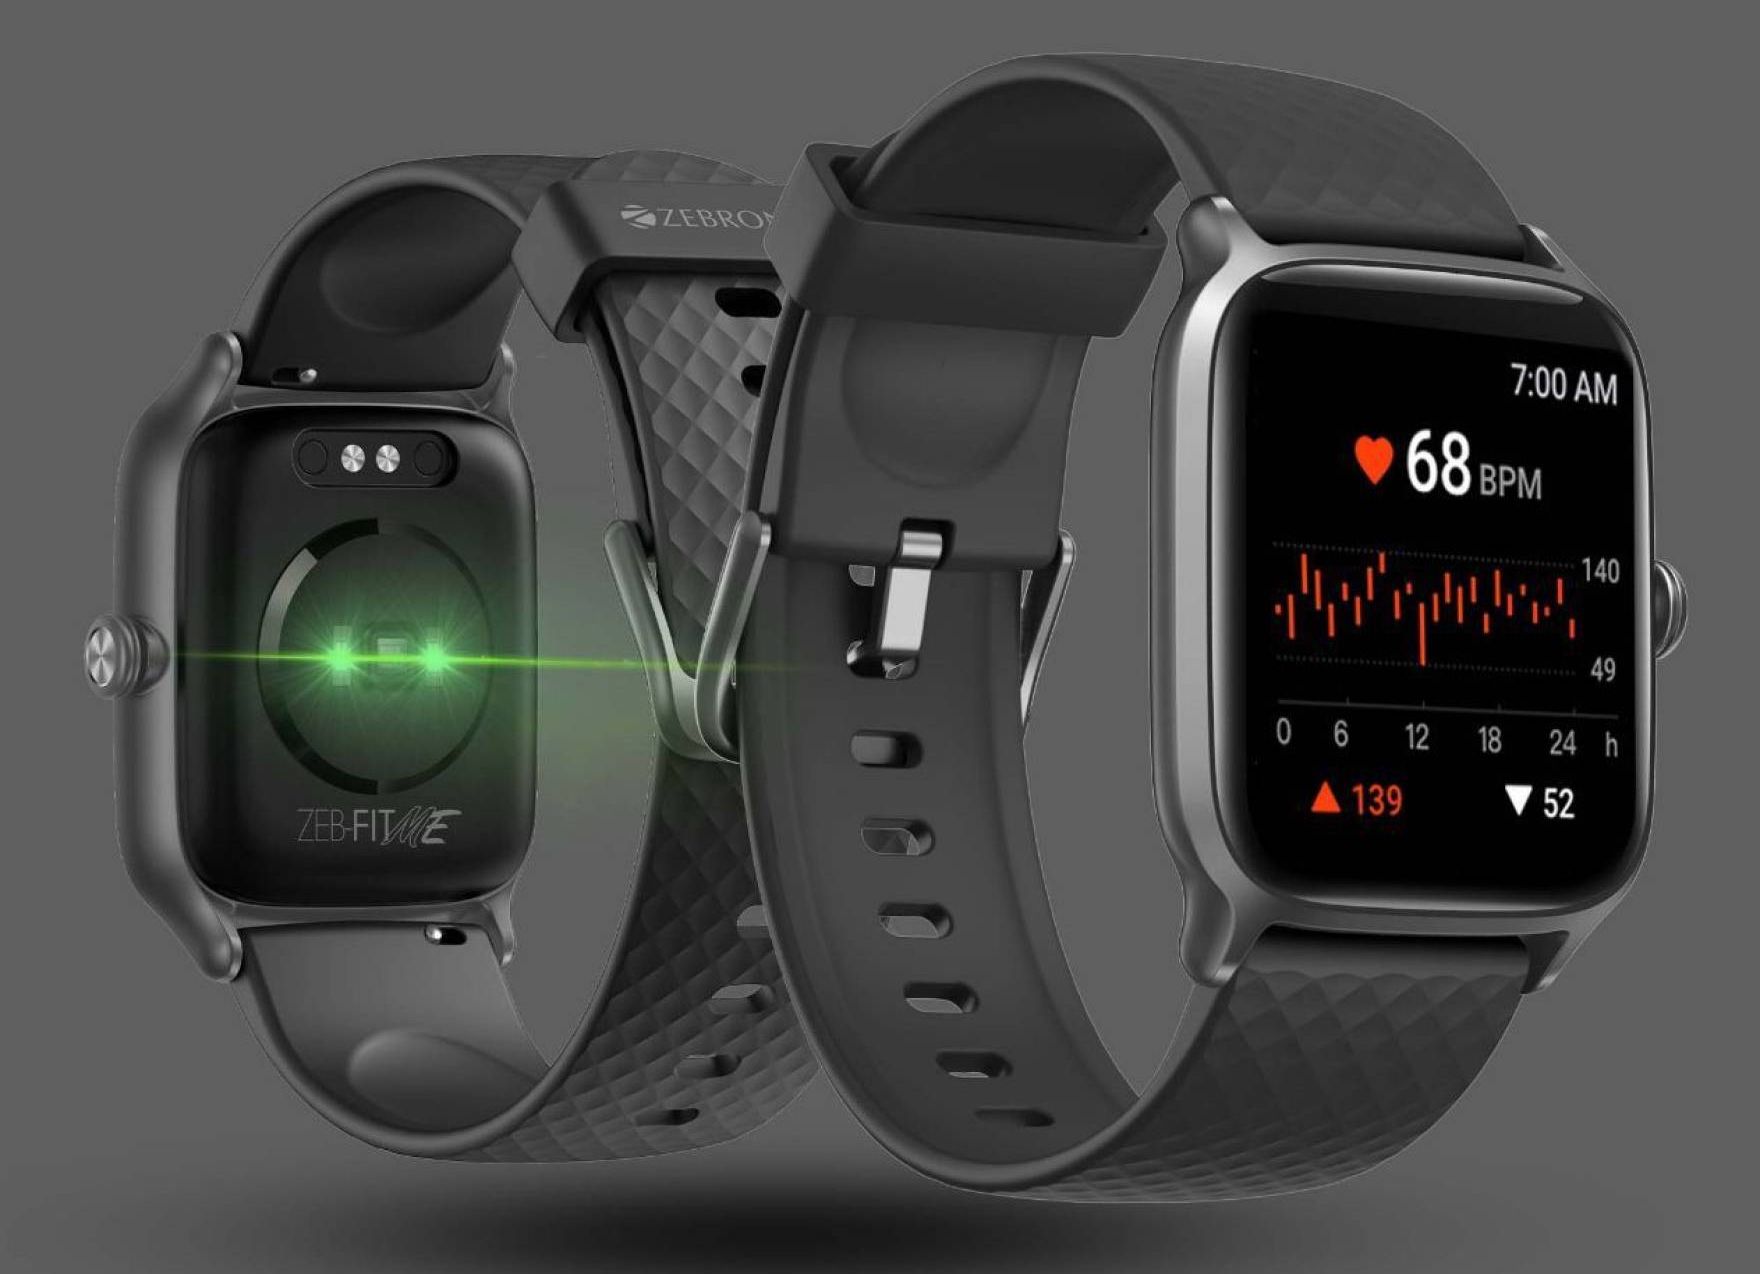 Zebronics Zeb-Fit Me Smartwatch Launched in India